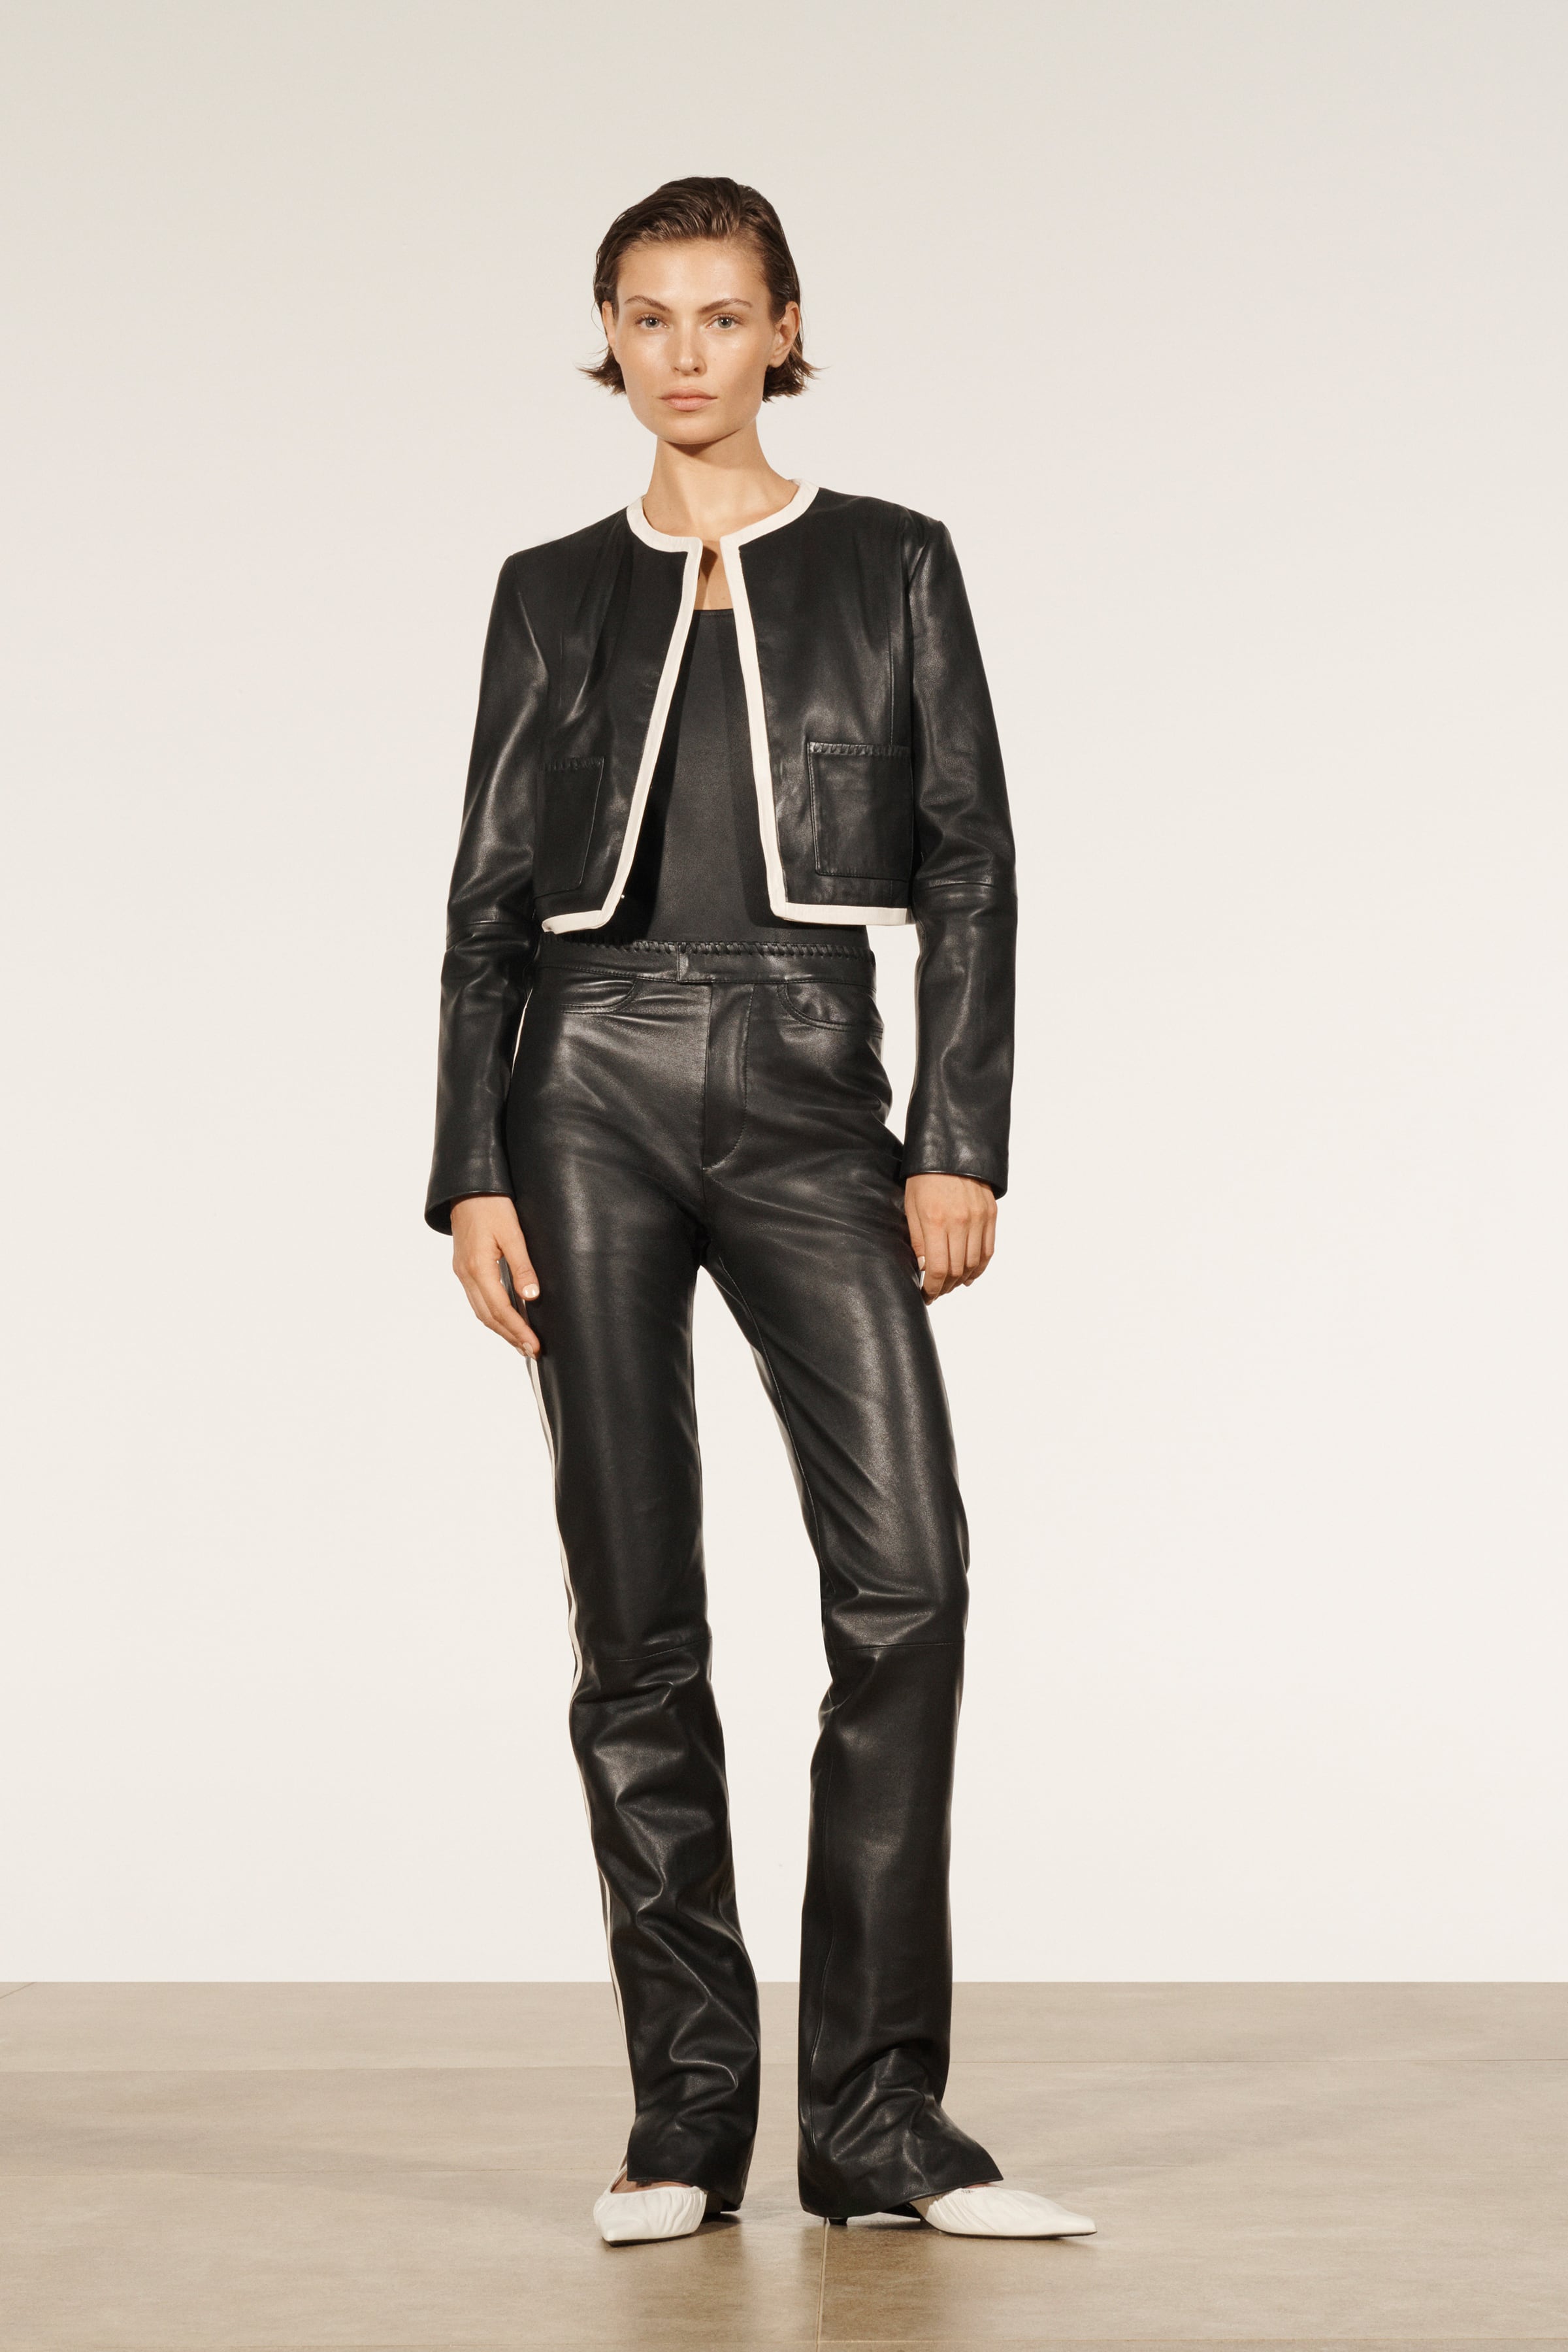 SKINNY LEATHER PANTS LIMITED EDITION